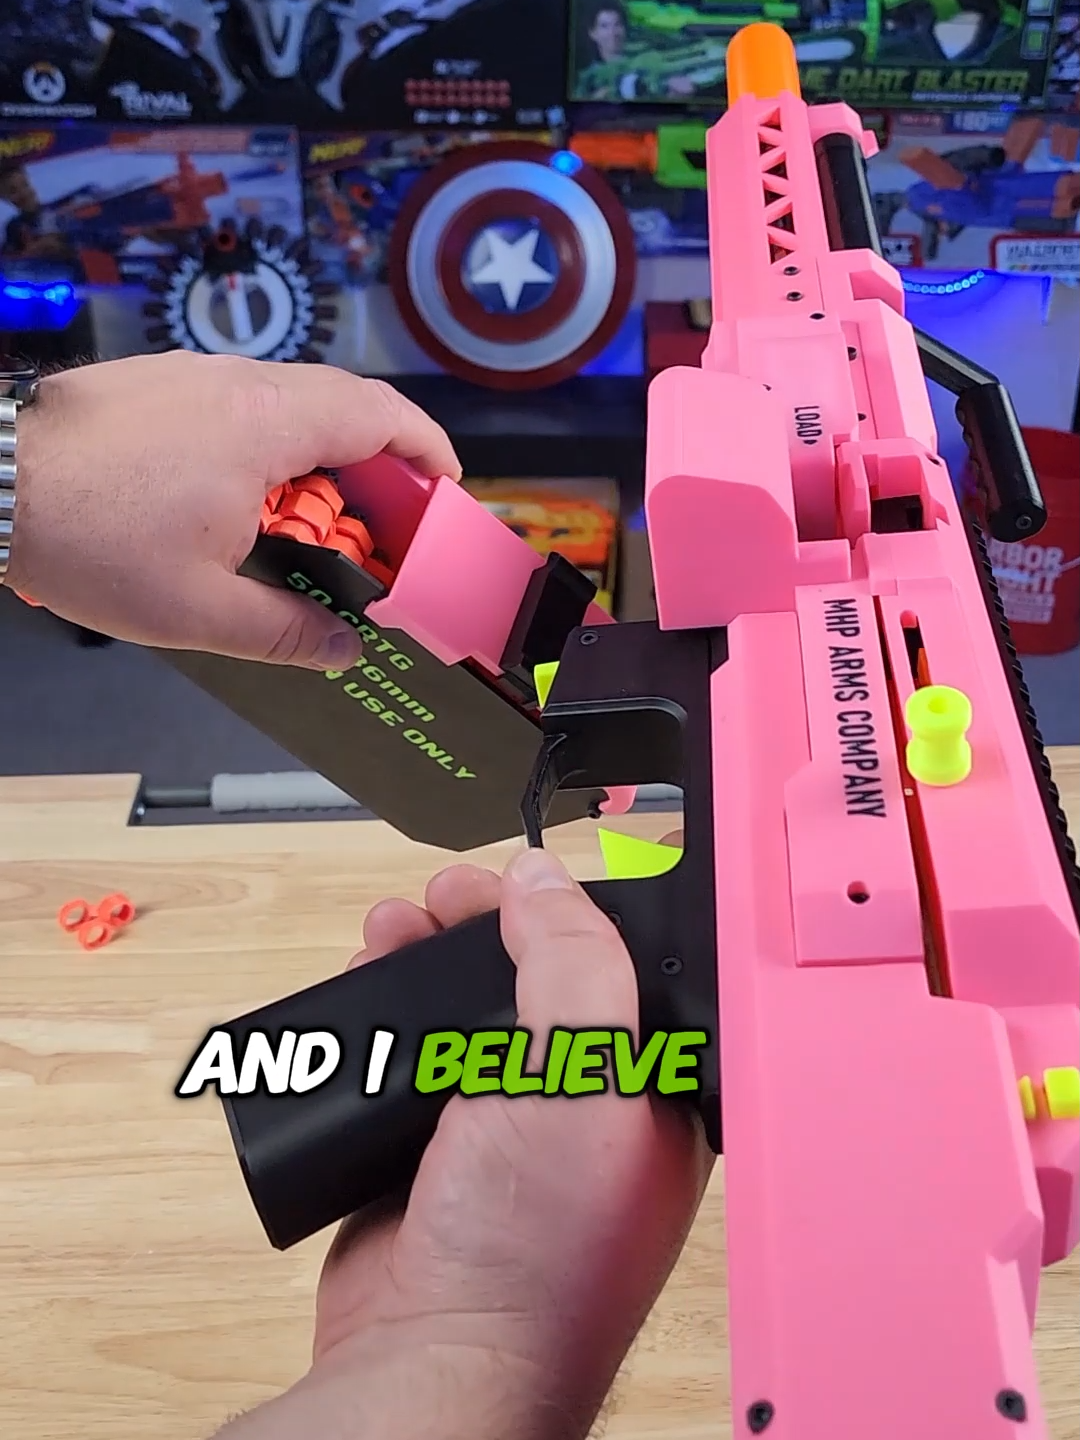 Troubleshooting the Nerf LMG #nerf #3dprintednerf #3dprintedtoy #nerfblaster #chain #blaster #3dprintedblaster  Want to pick up an MHP LMG?  Want to Also Support Flux Labs so we can keep making the content you love? Then Support the Channel by using the Official DrFlux FLF Affiliate Link: https://www.frontlinefoam.com/product/the-mhp-lmg/?sld=2